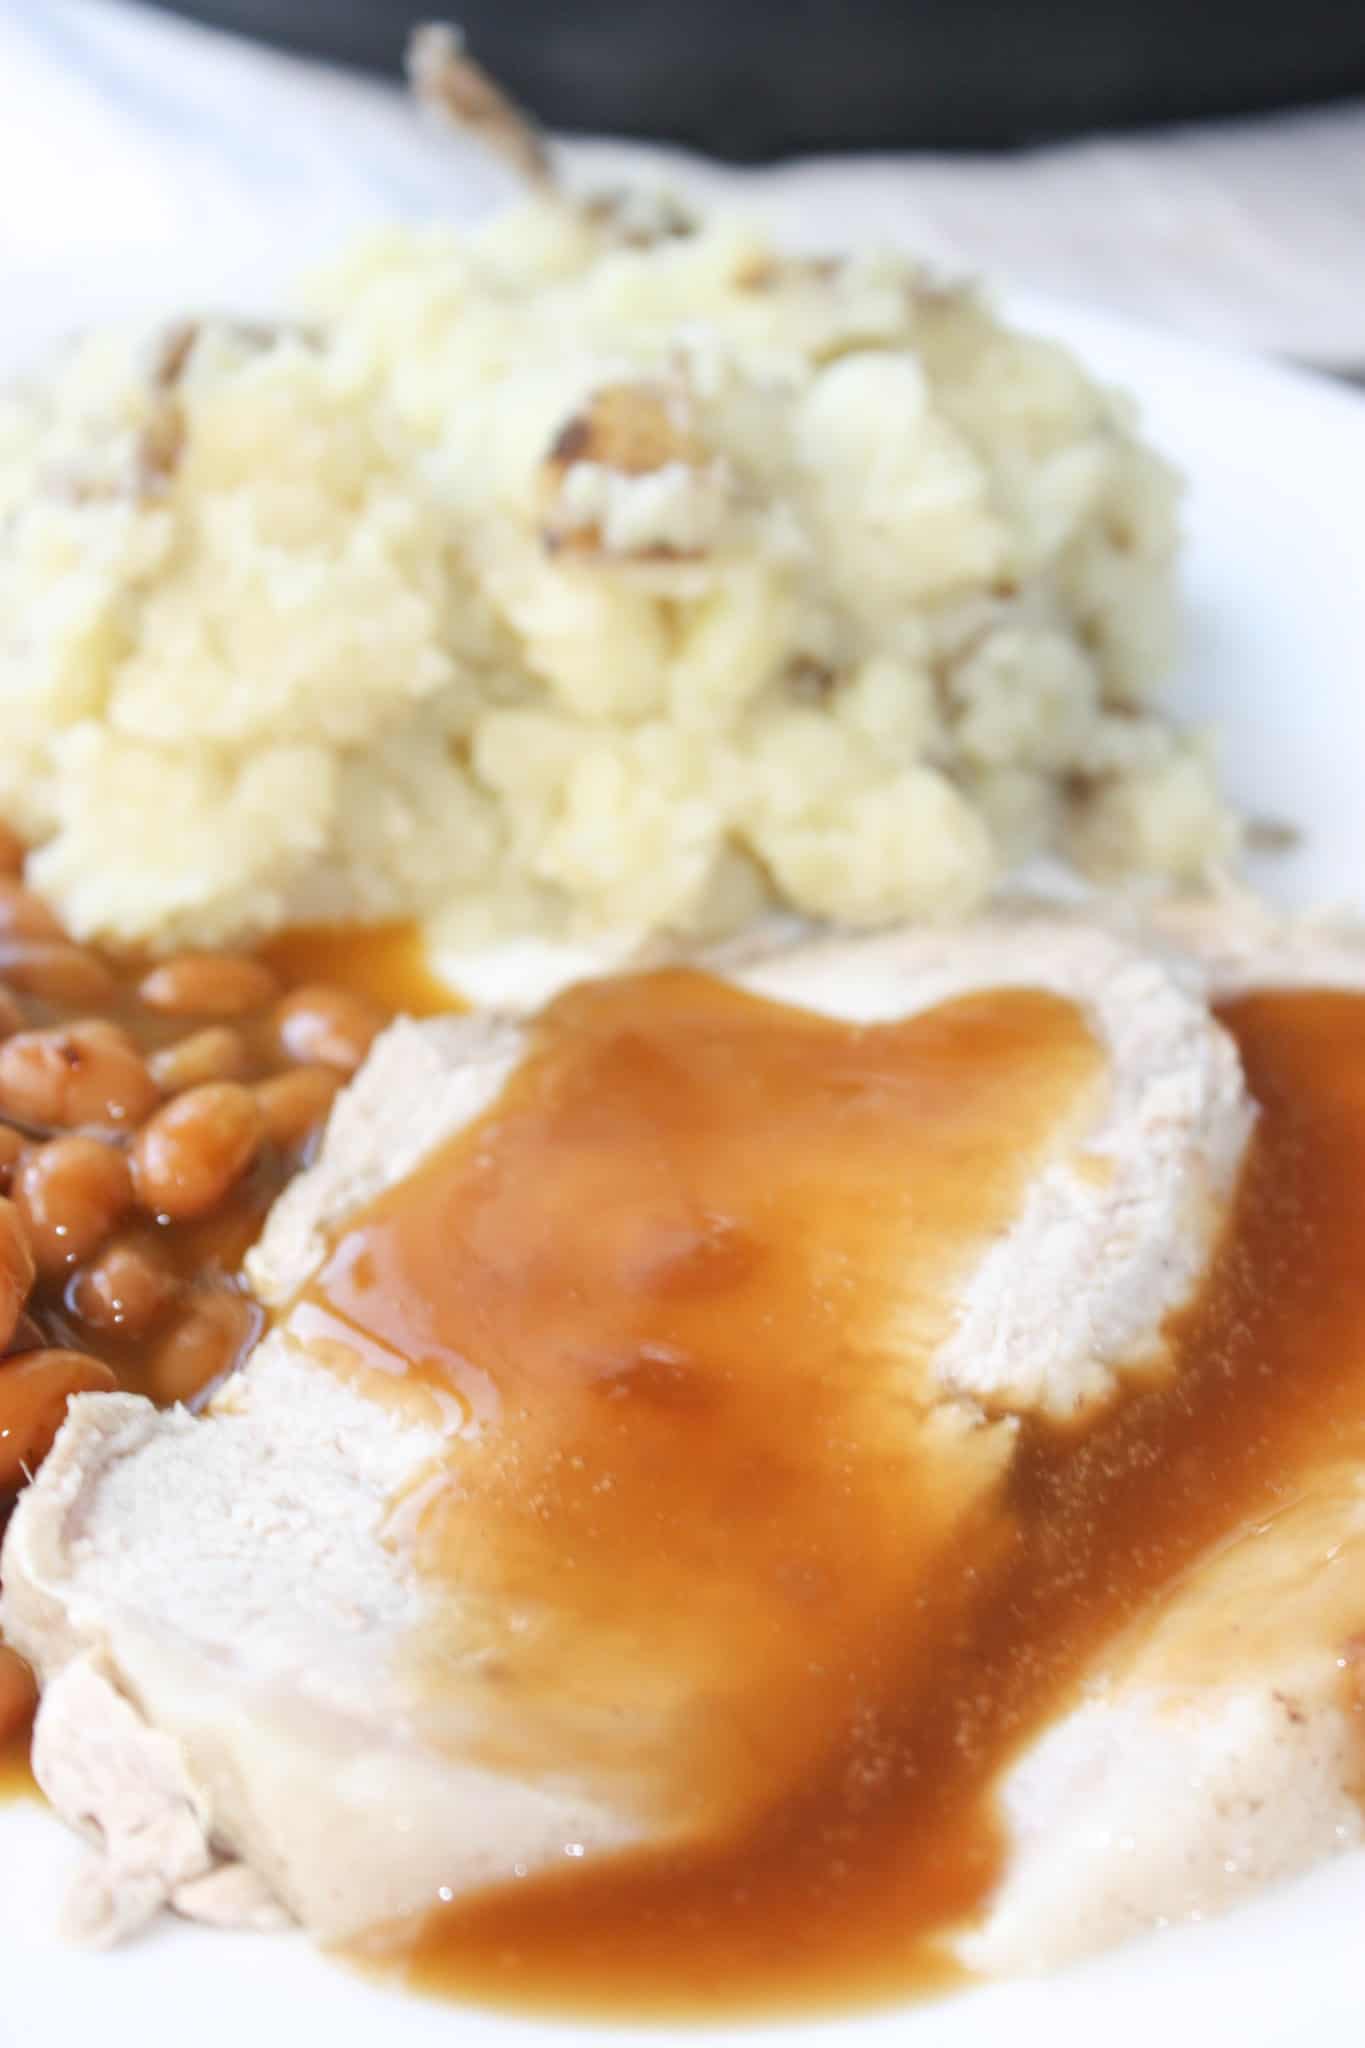 Instant Pot Pork Loin Roast with Garlic Mashed Potatoes is another easy pressure cooker recipe. This roast, flavoured with fall spices, turned out so moist and delicious.